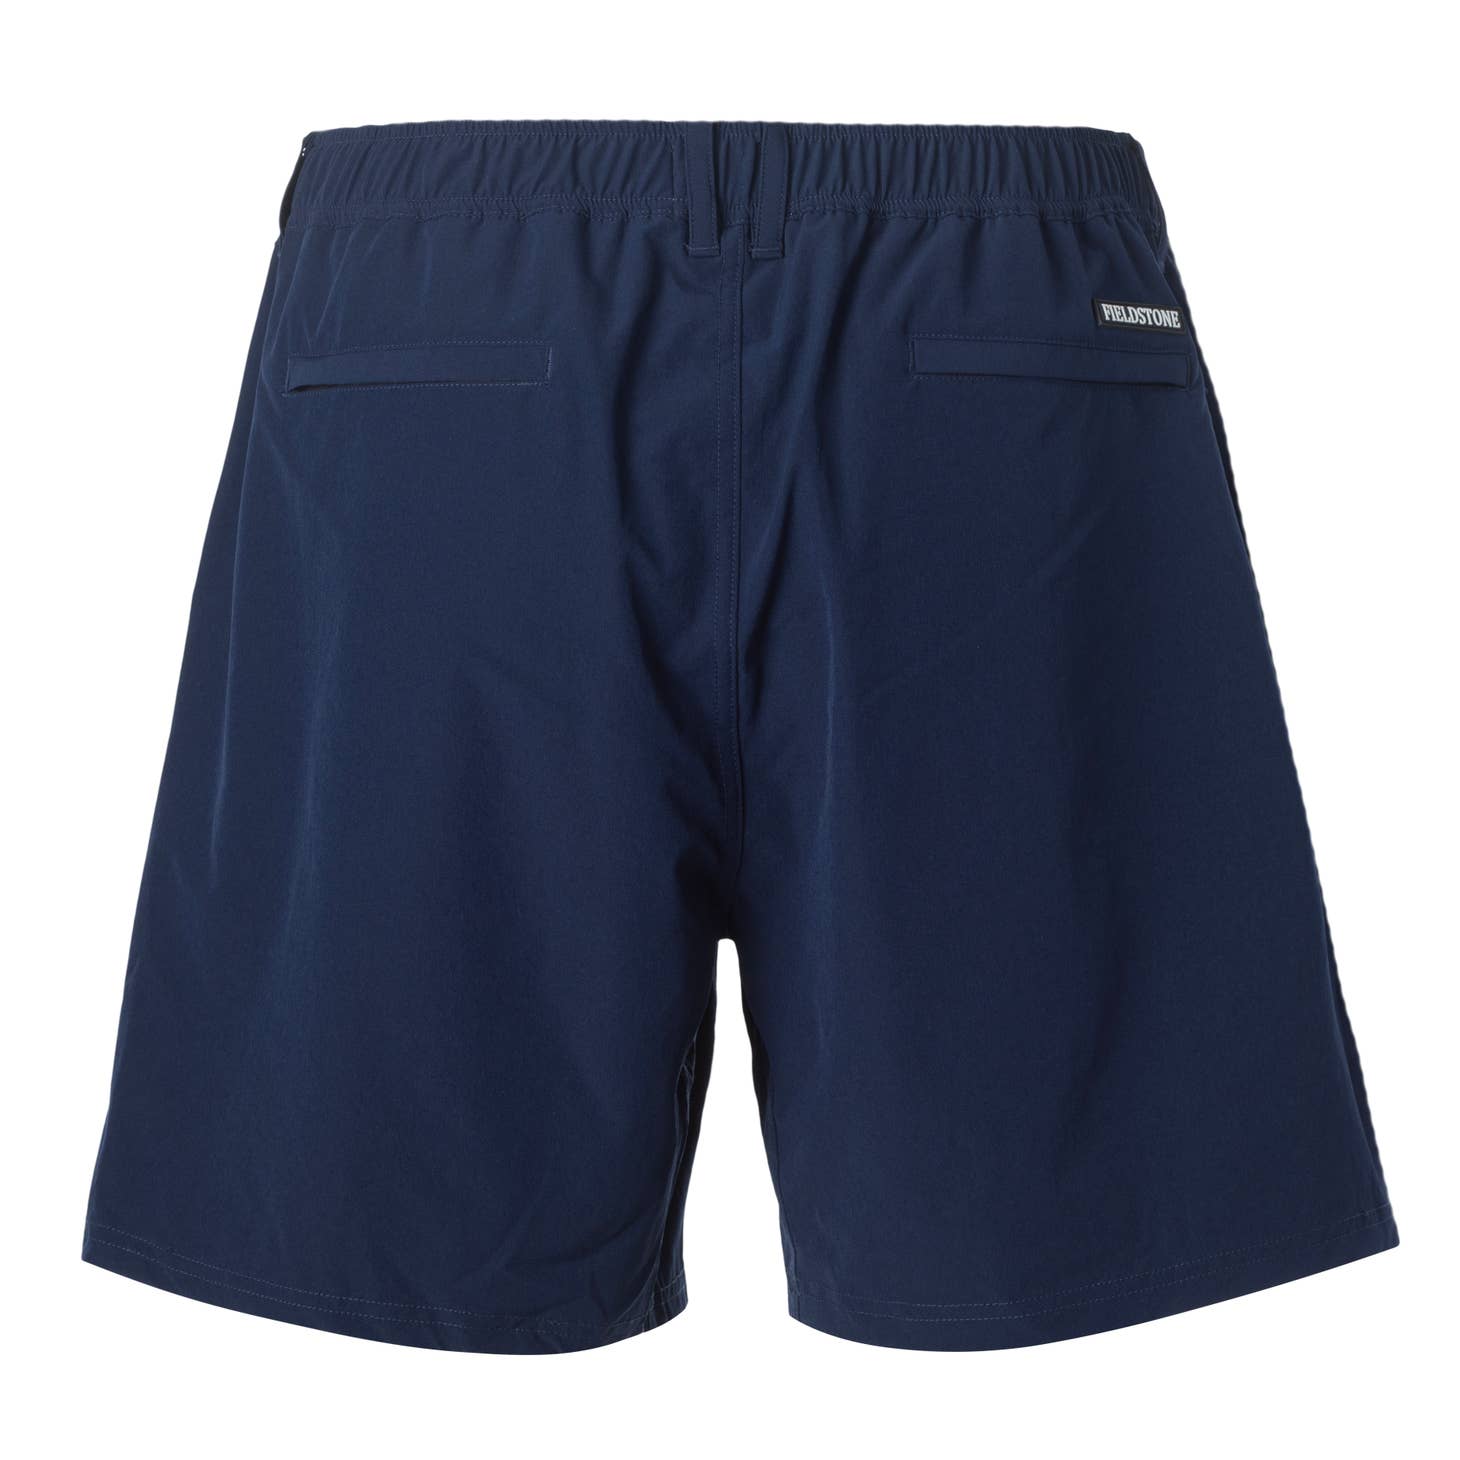 A Rambler Shorts from Fieldstone Outdoor Provisions Co. with a white logo on the side.